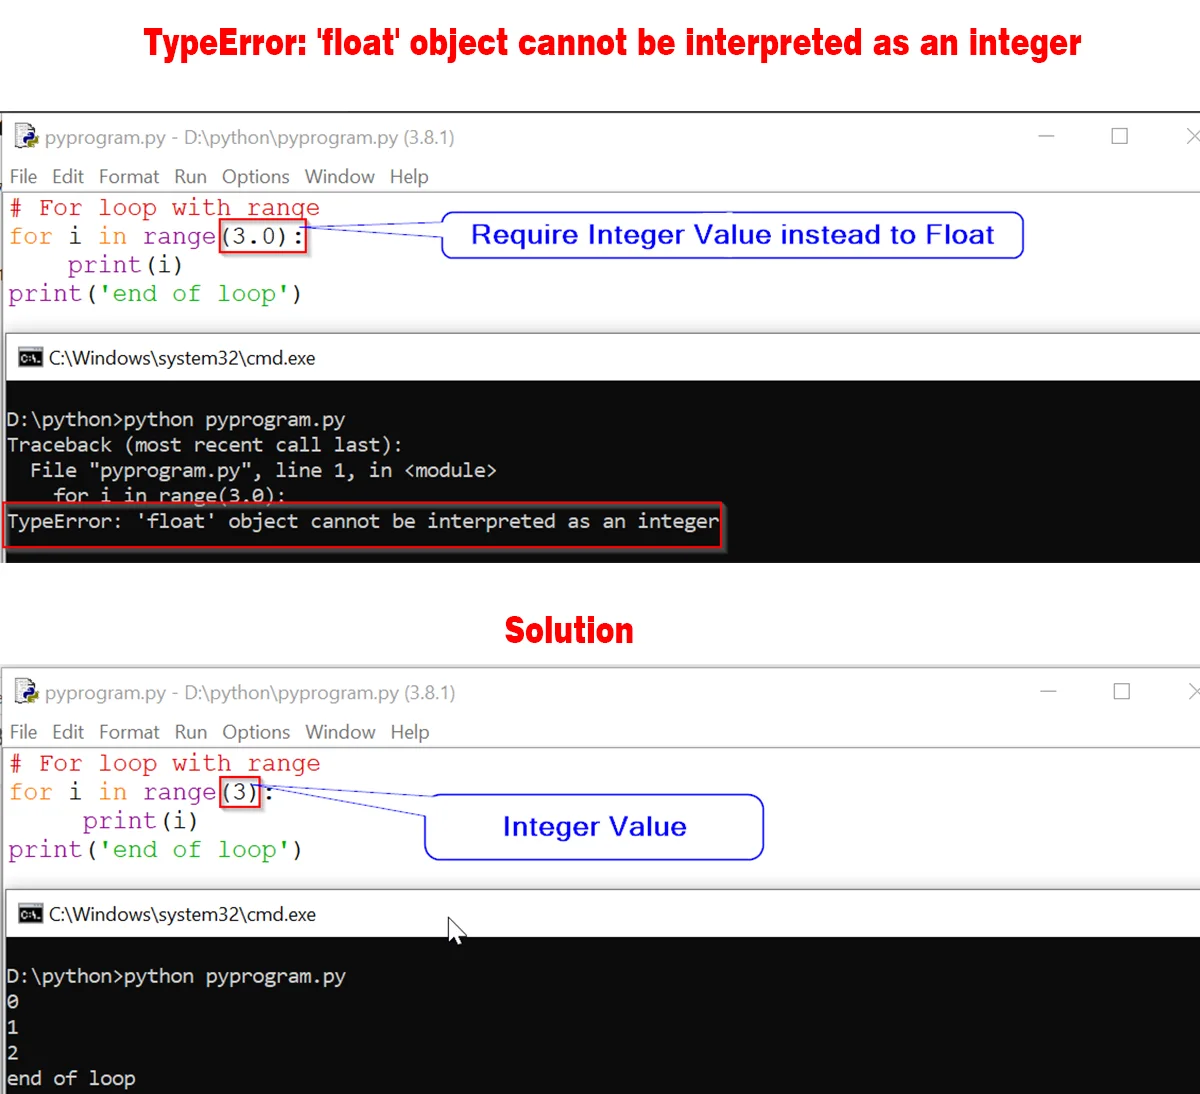 Typeerror: 'Float' Object Cannot Be Interpreted As An Integer